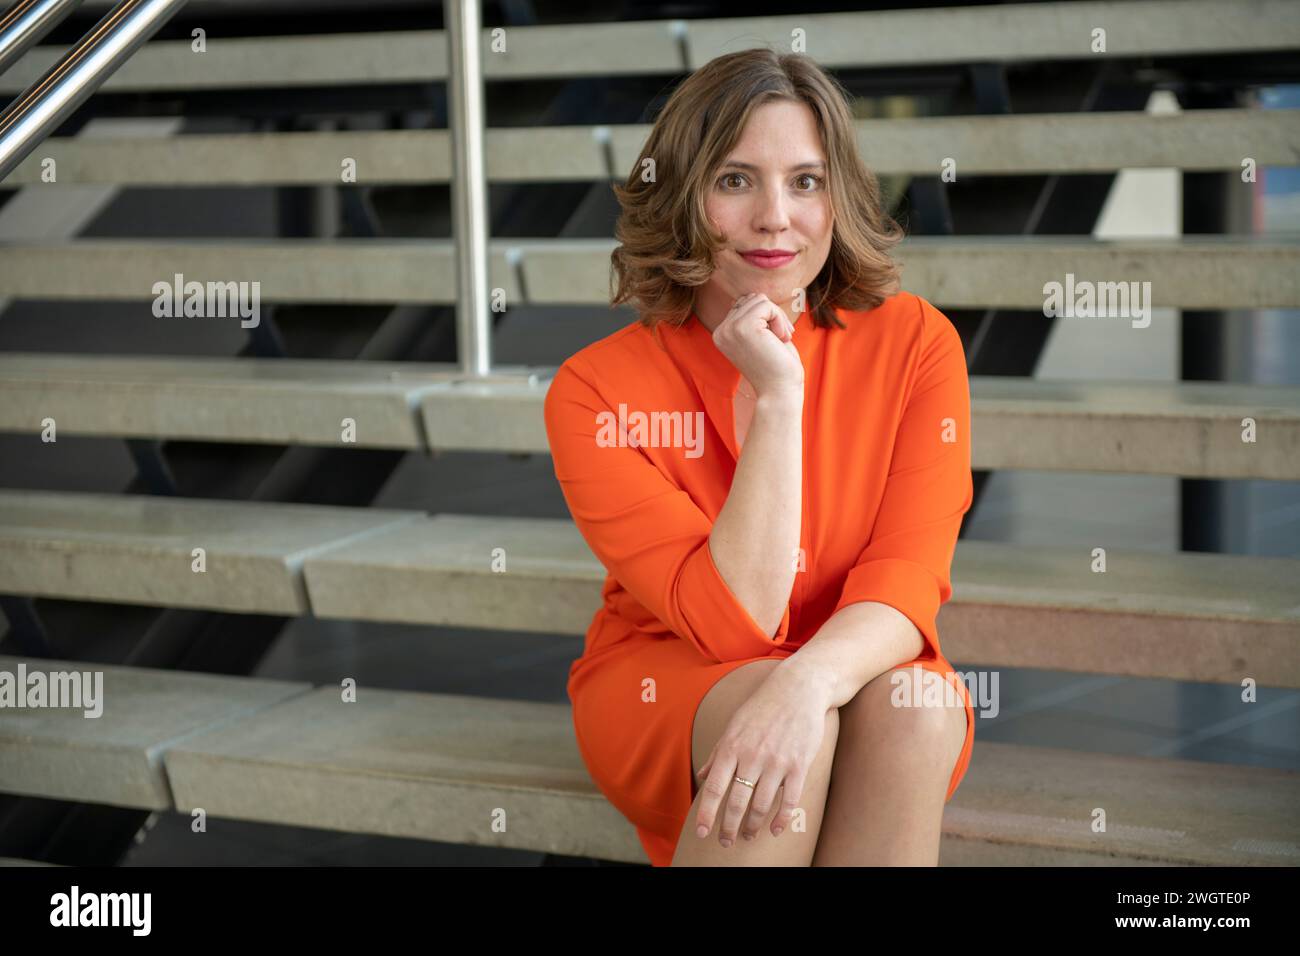 Attractive woman sitting on steps in business wear Stock Photo